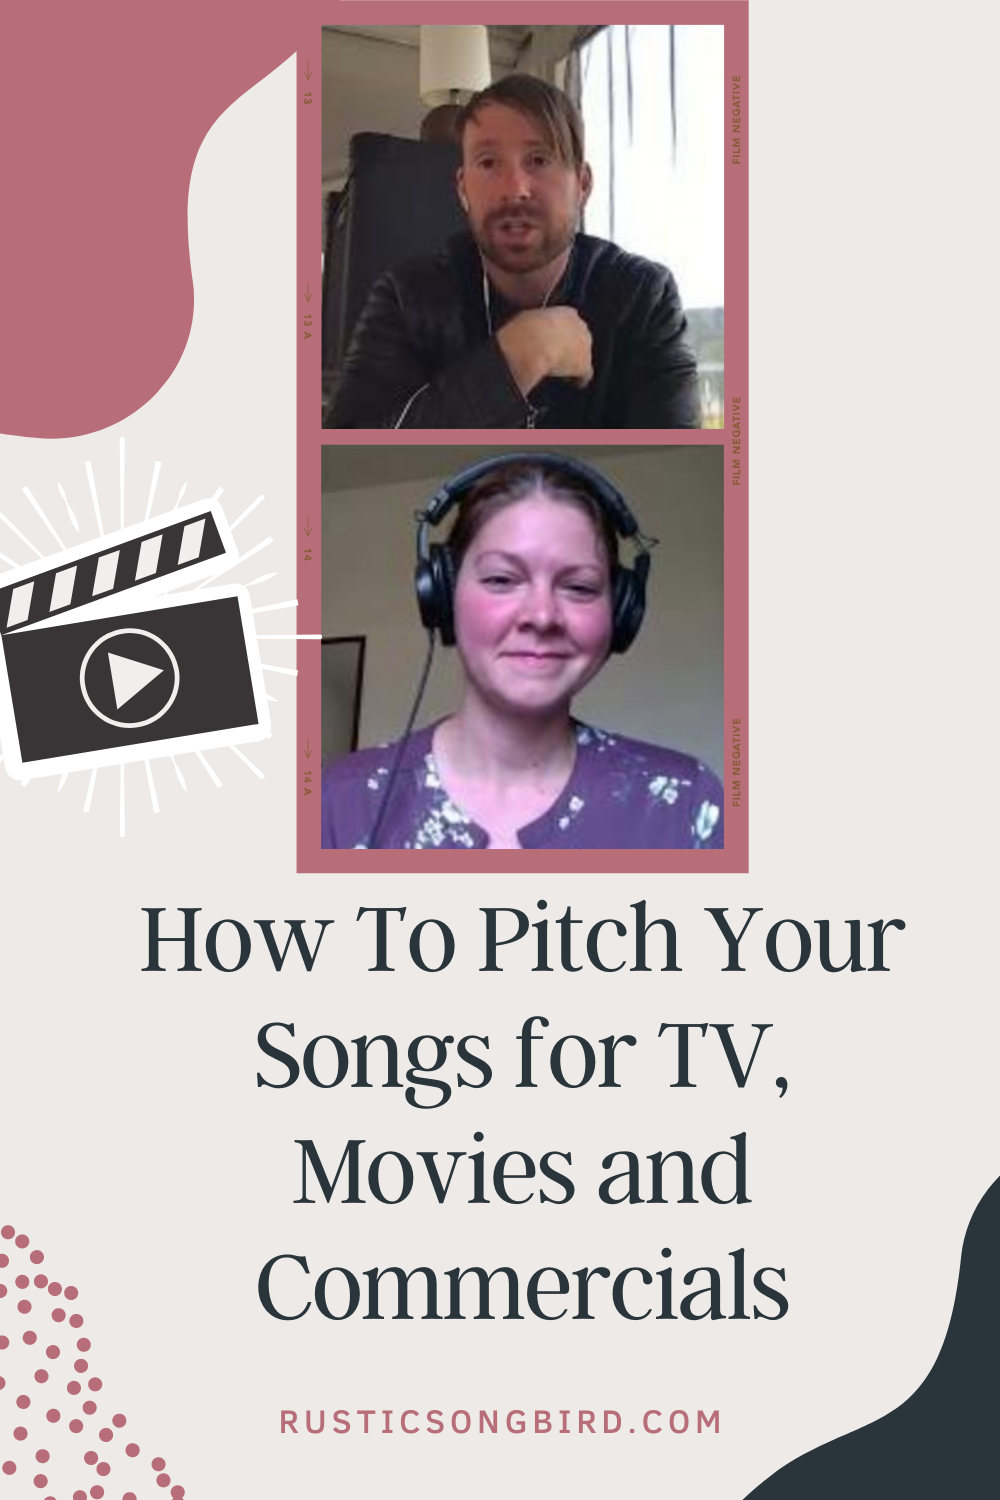 images of people featured in the video and title text that says "how to pitch your songs to tv movies and commercials"